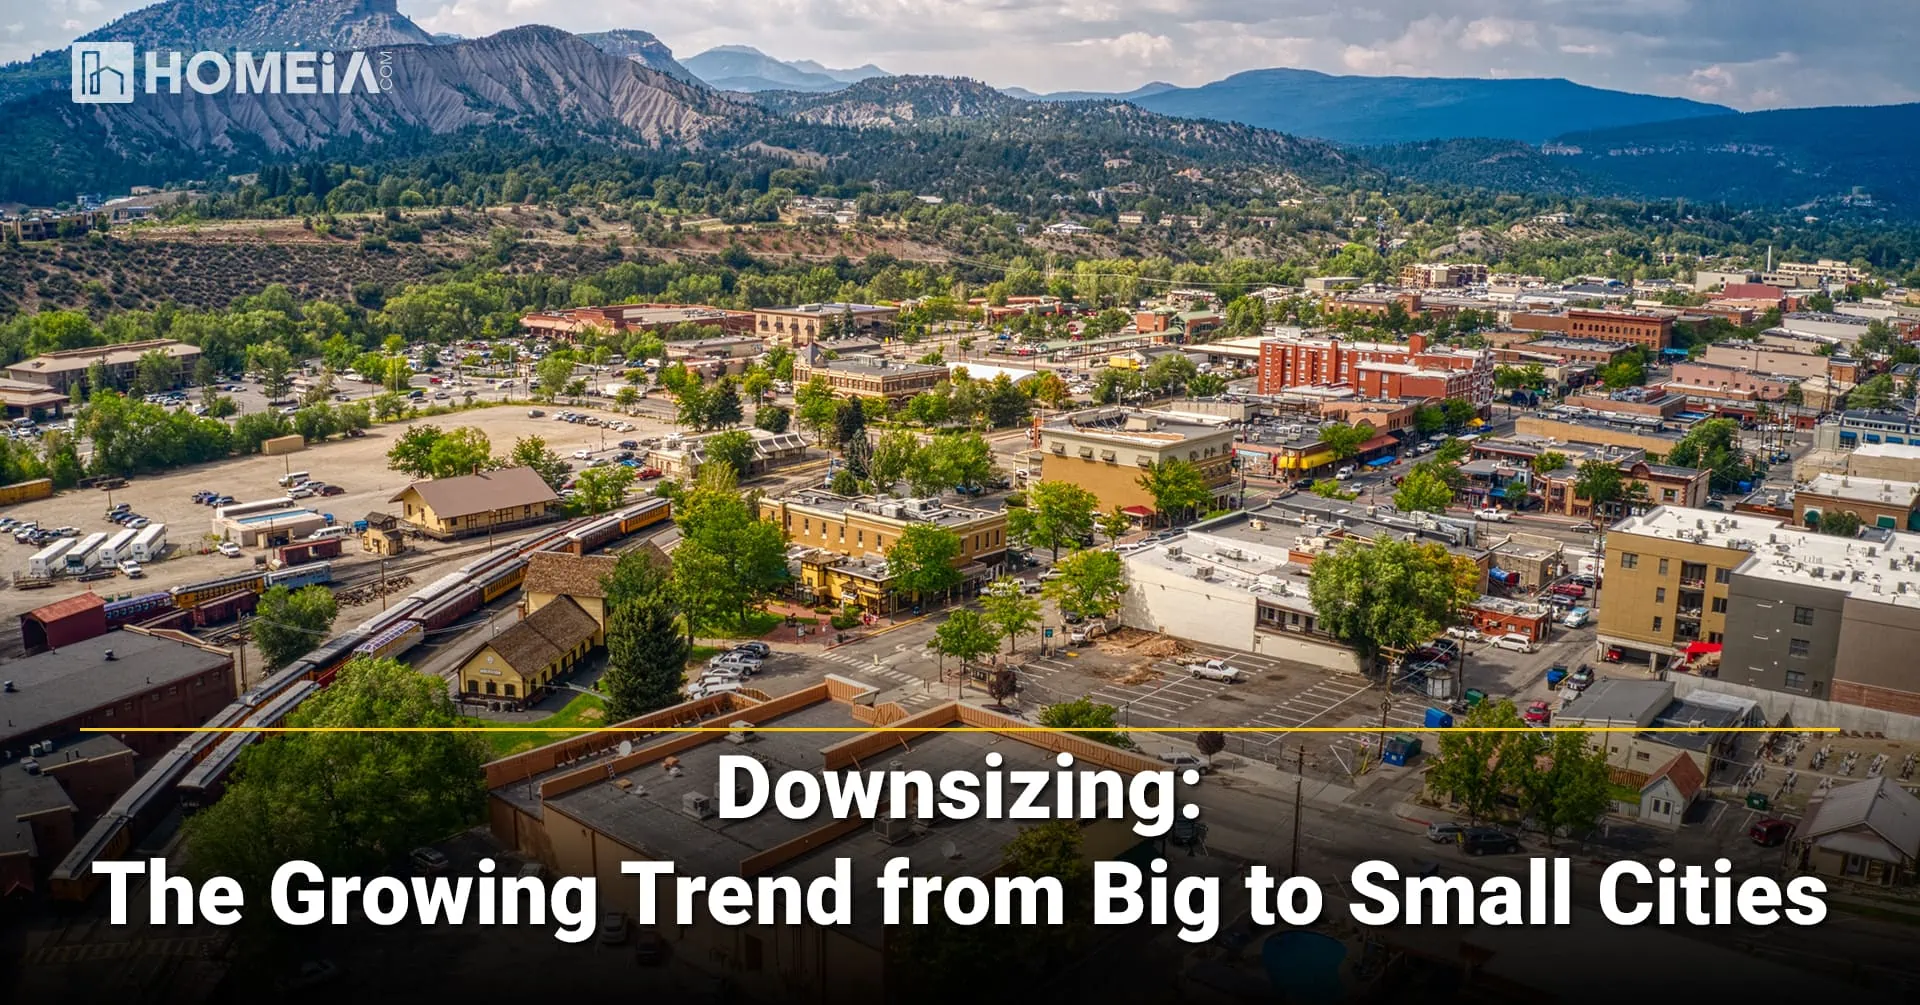 Downsizing: The Growing Trend from Big to Small Cities